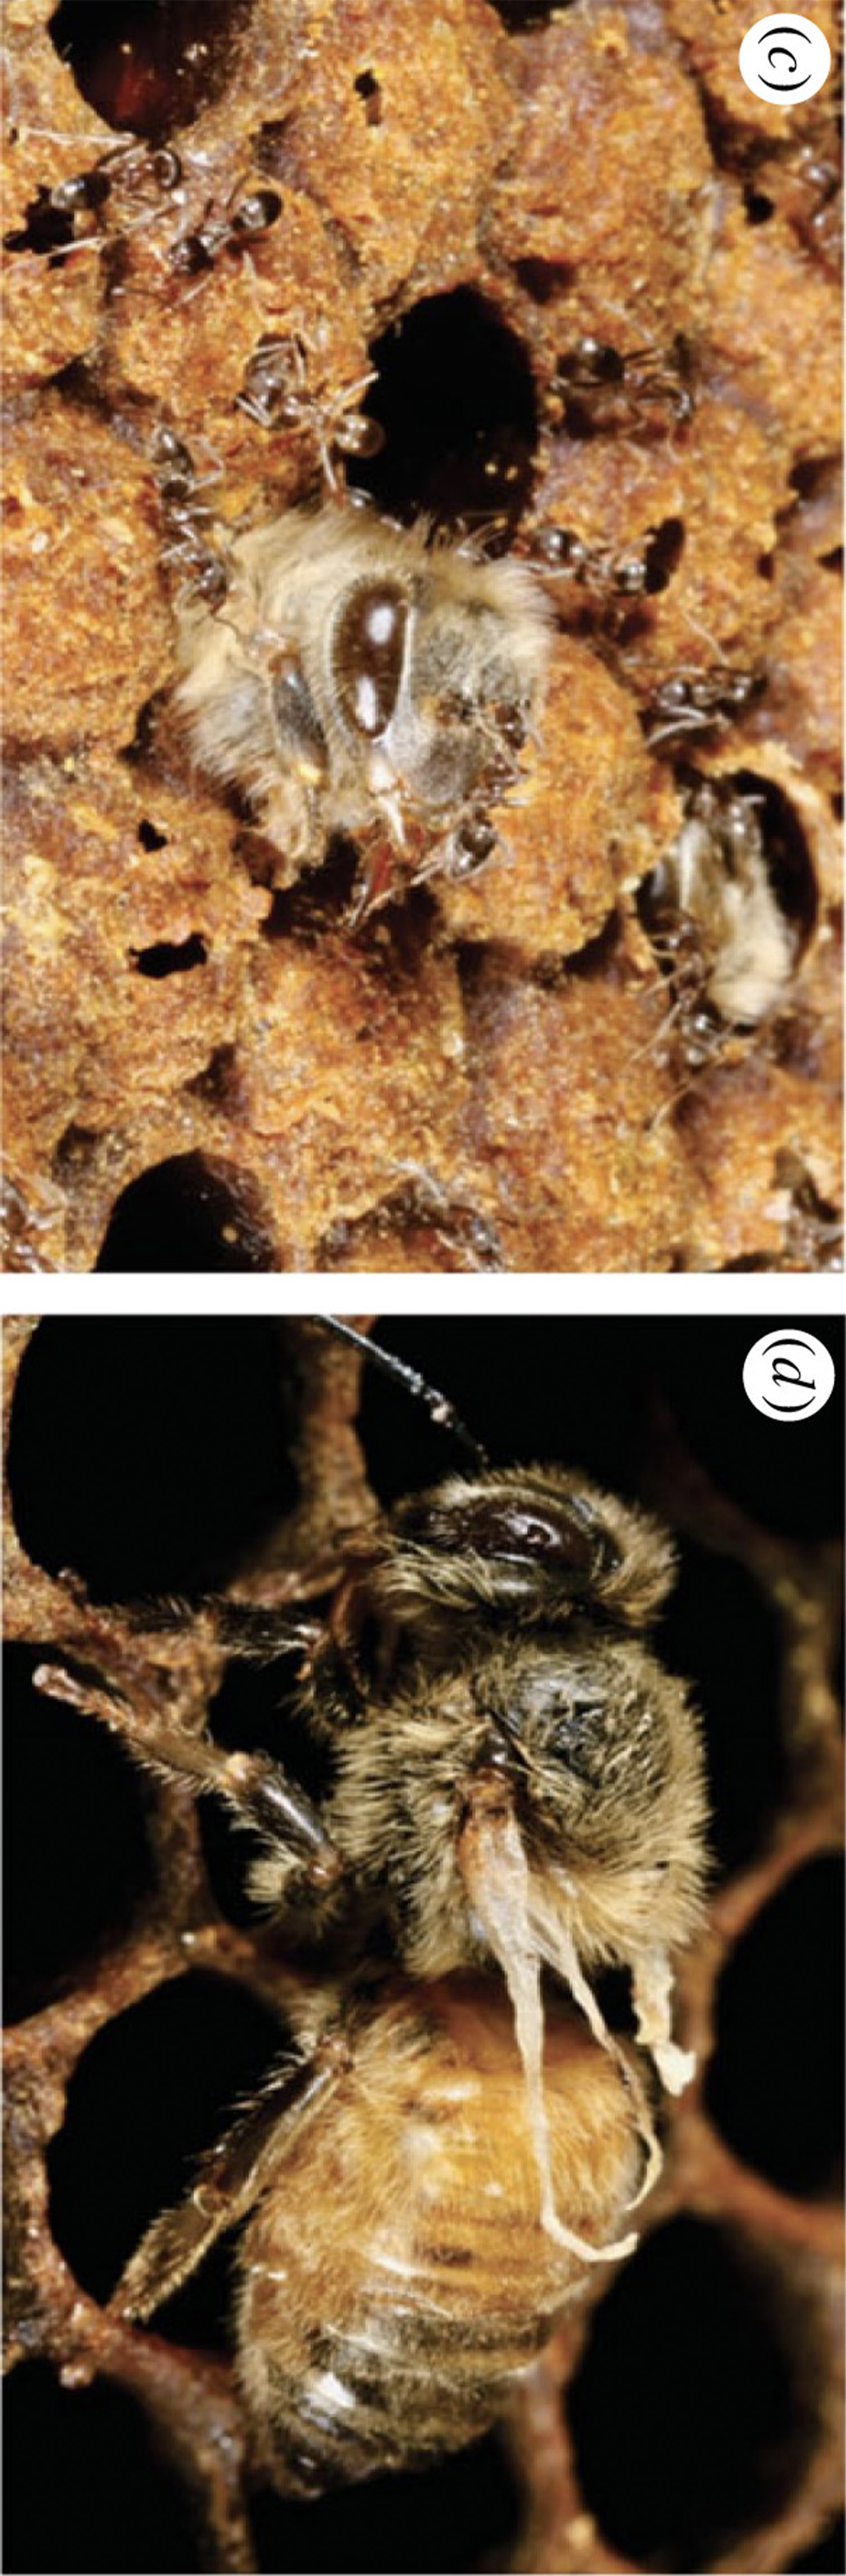 DWV in bees due to ants